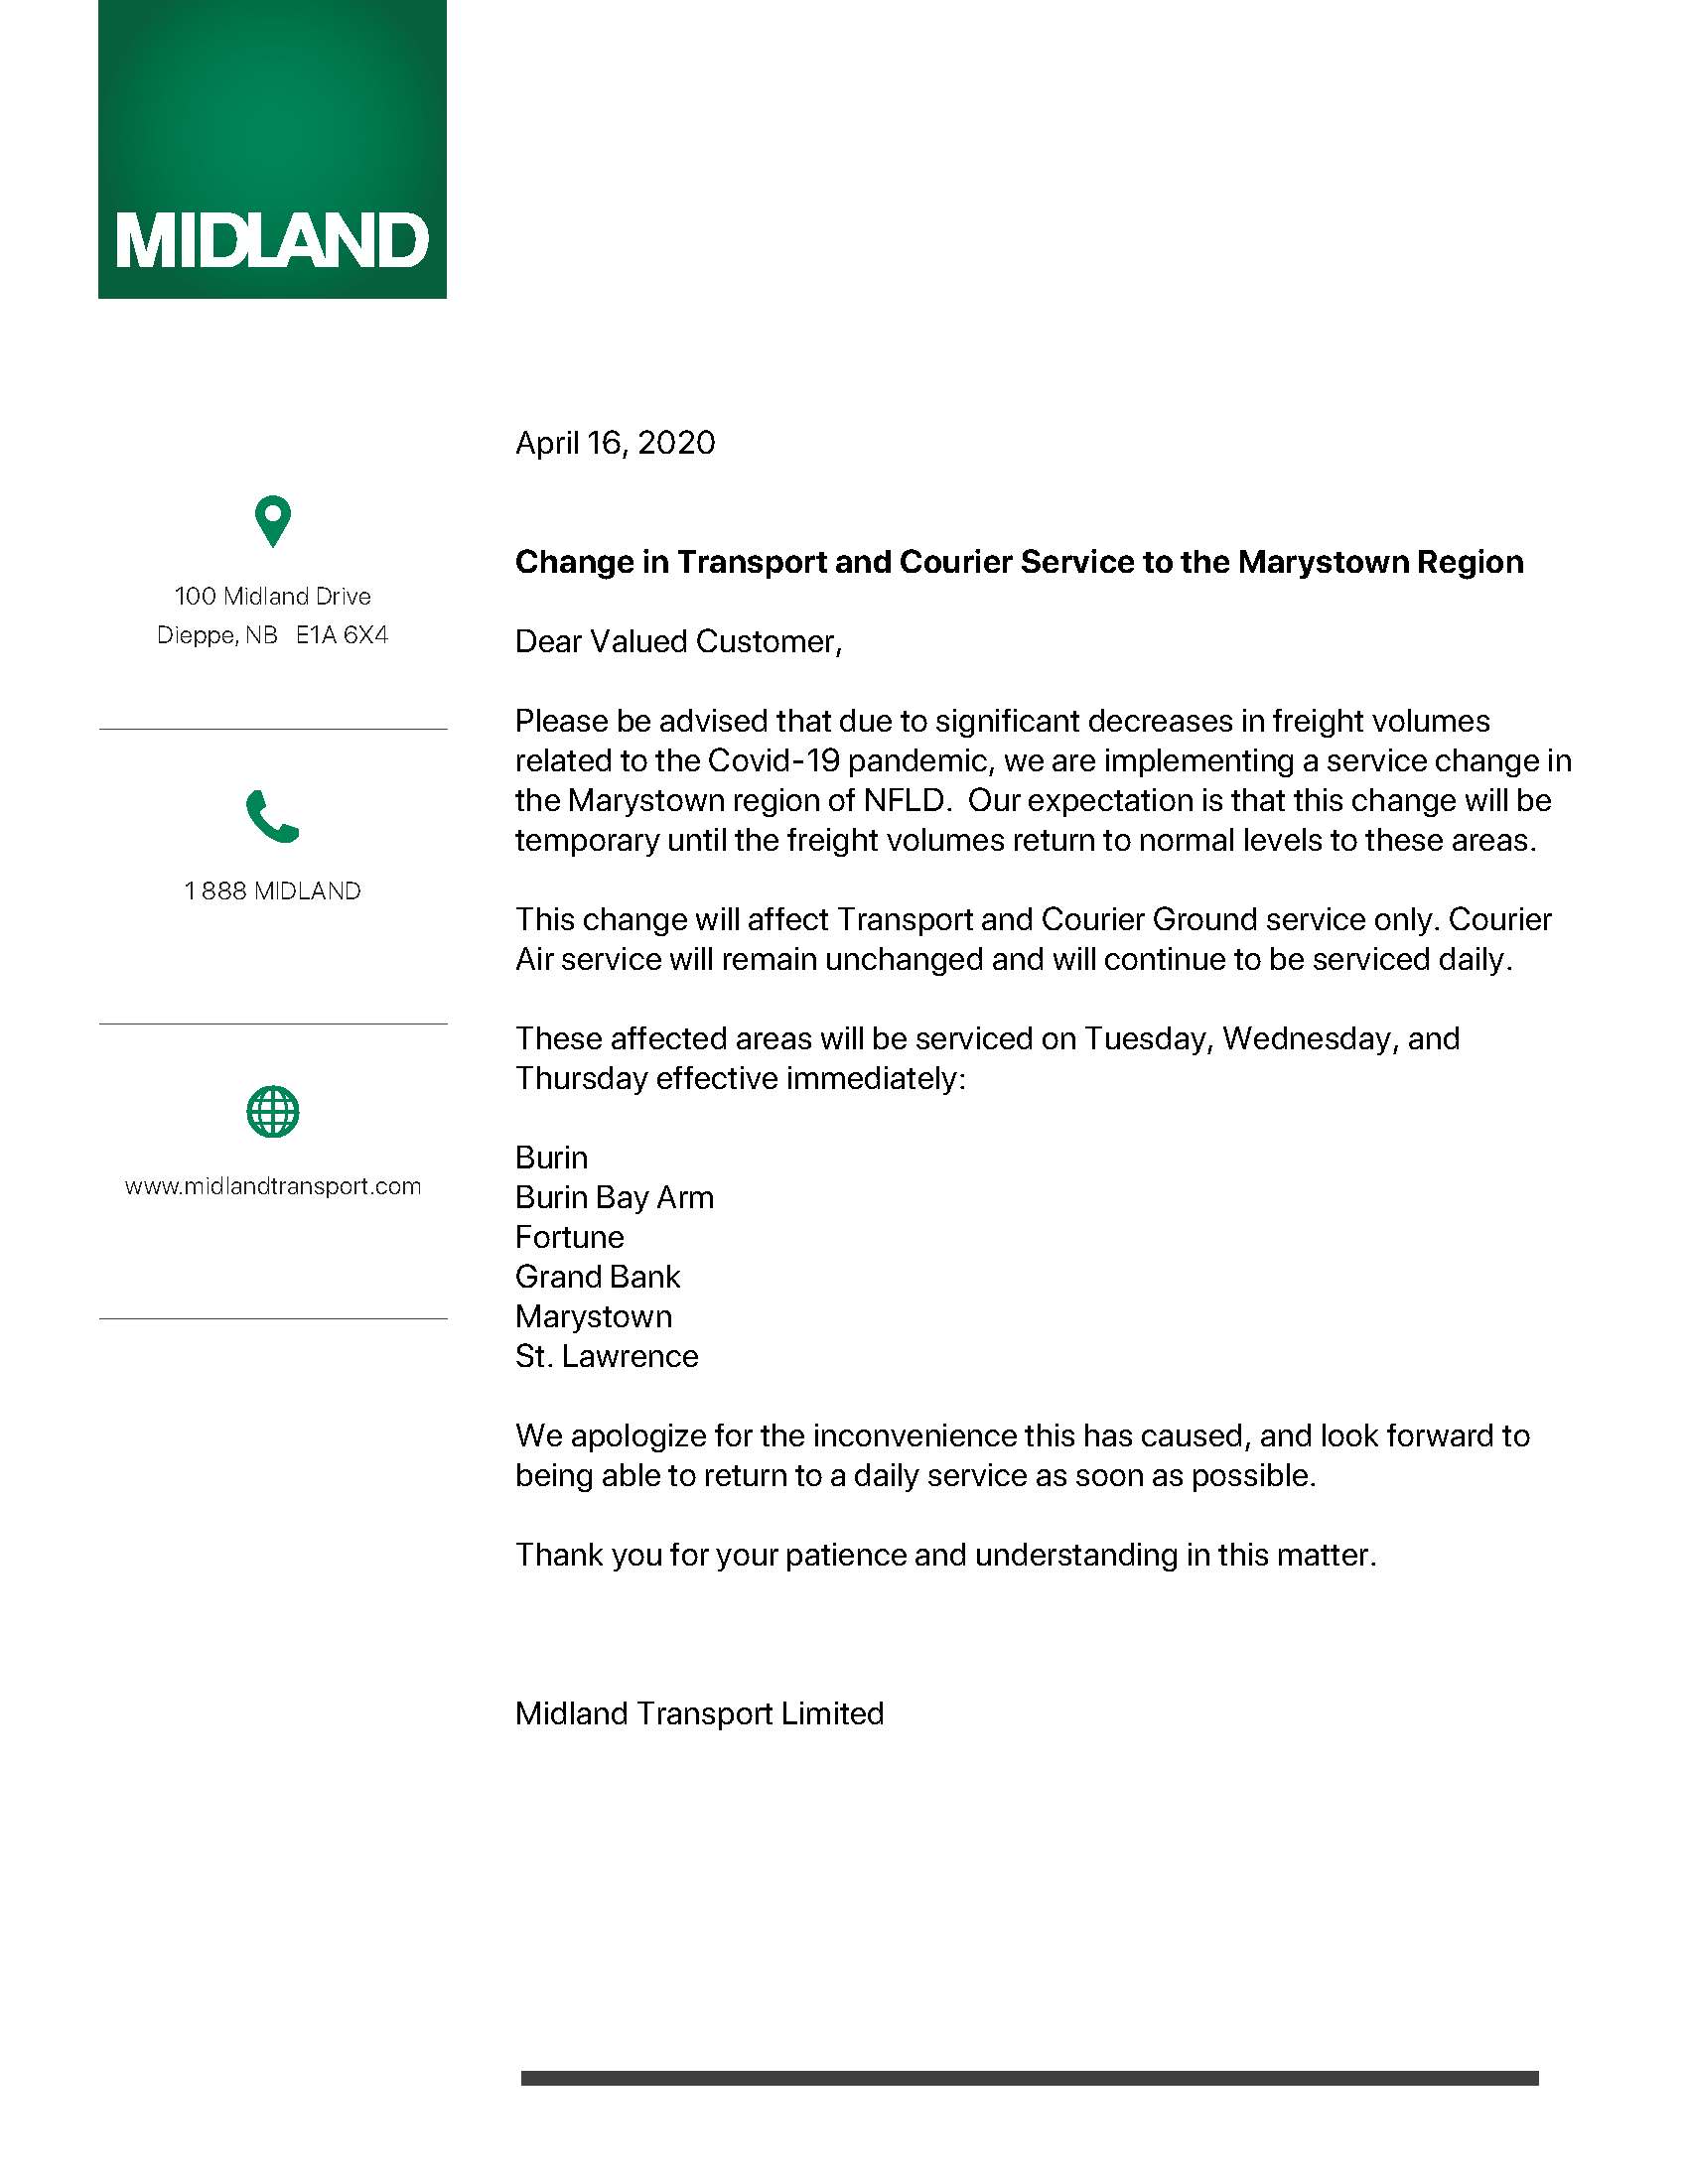 Change in Transport and Courier Service to the Marystown Region - April 15, 2020